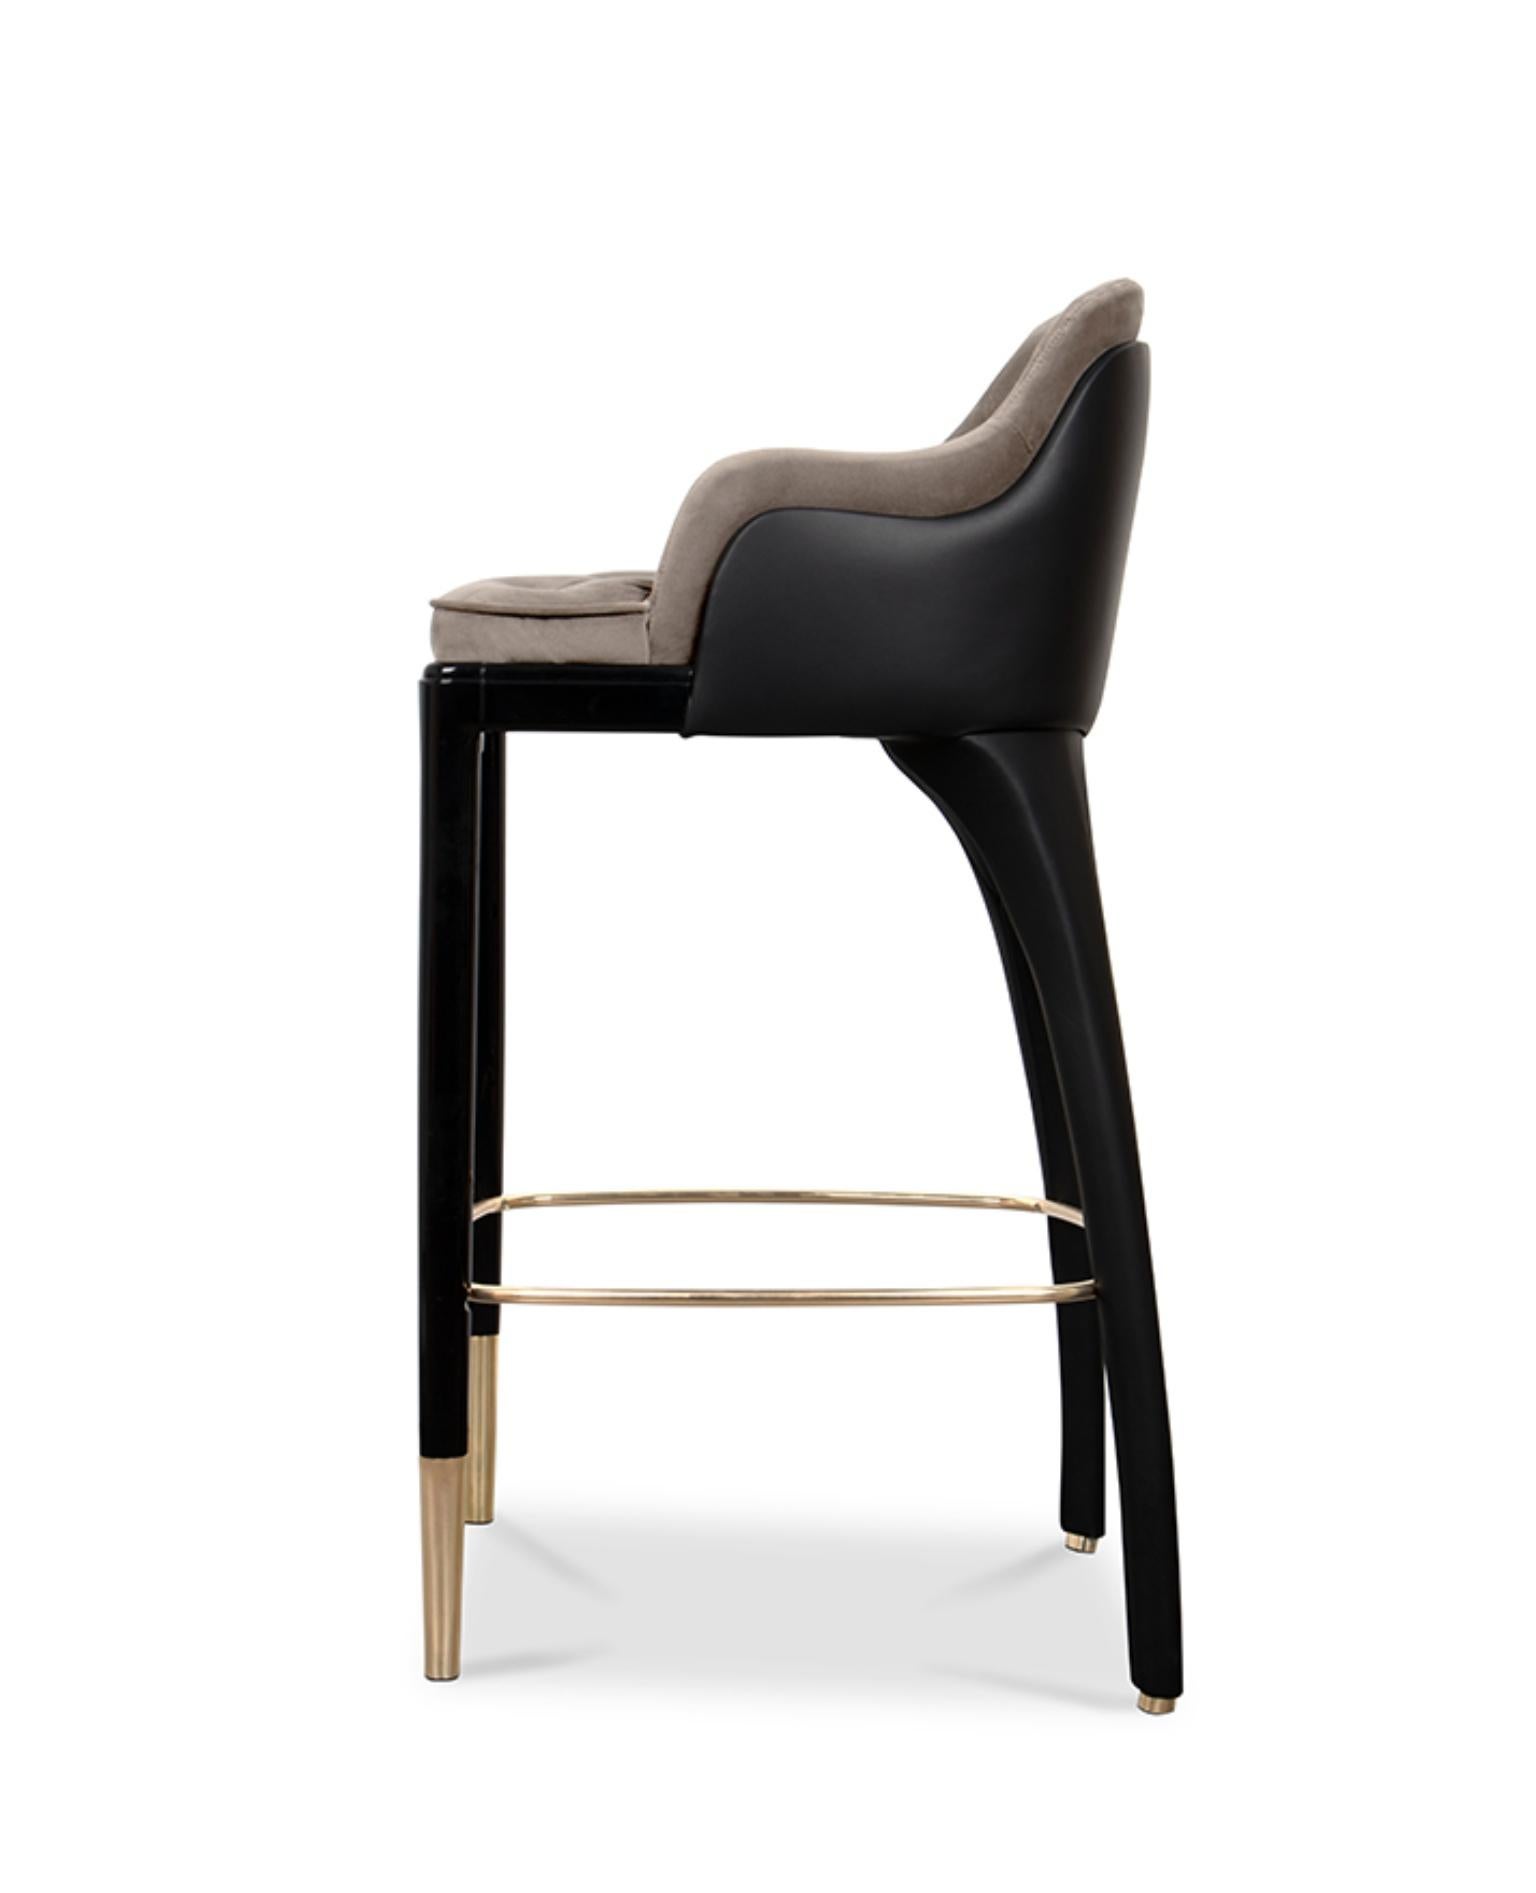 Part of the timeless Charla collection, this elegant piece is made of high-quality materials, providing excellent comfort and an attractive design that is sure to become the center of attention. Available as both a bar chair and counter stool, this